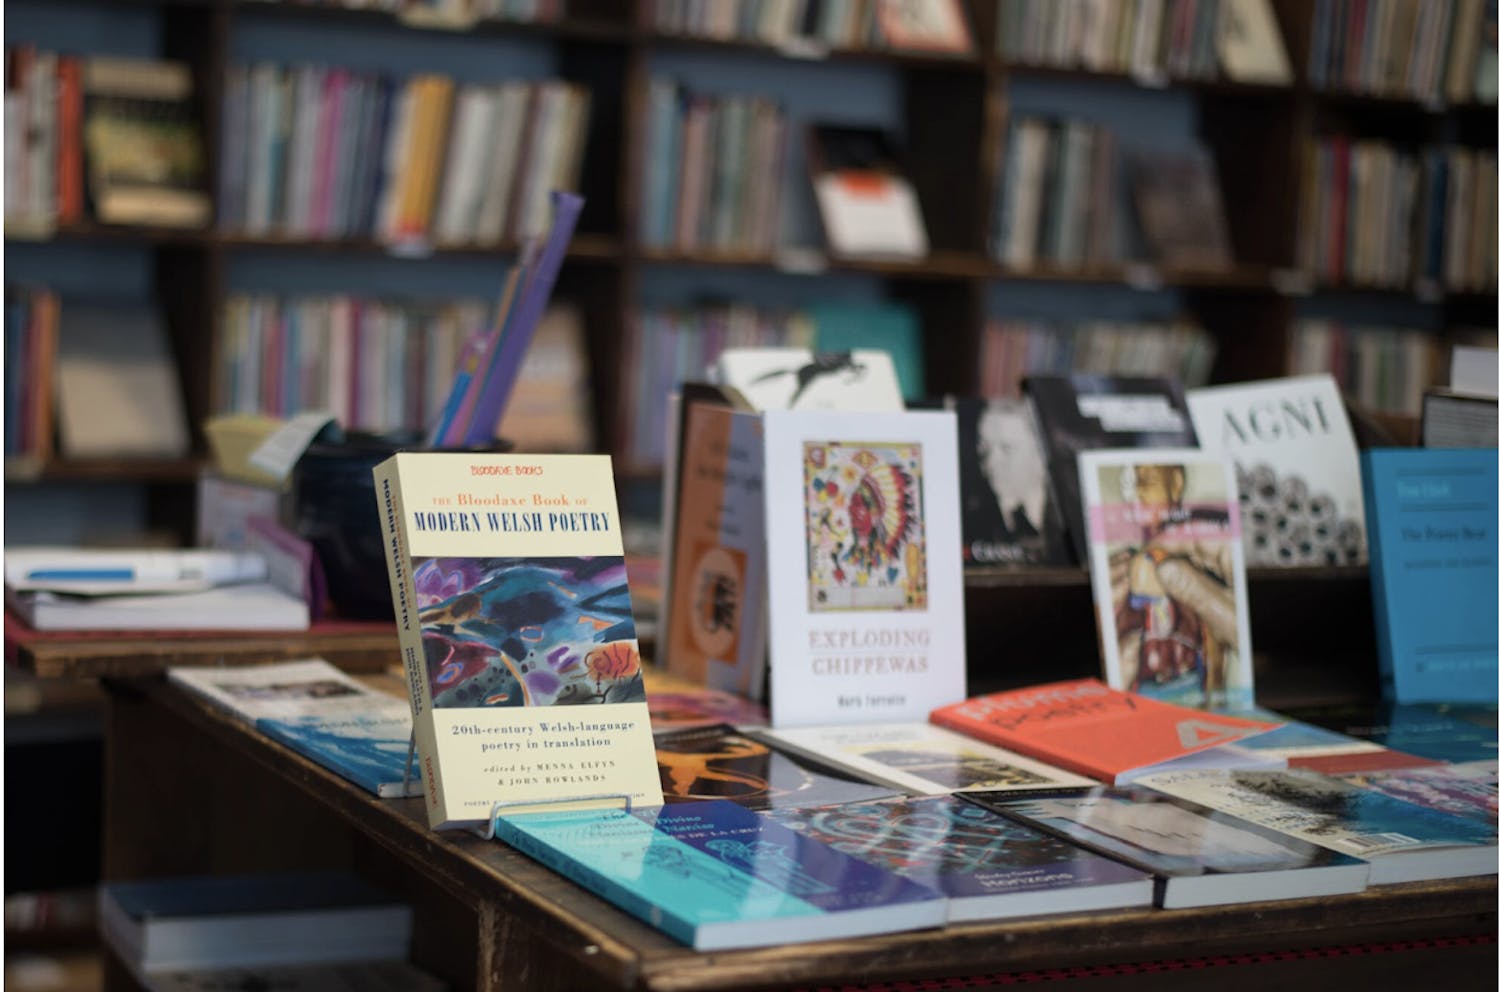 Books displayed on a table at Grolier Poetry Book Shop.